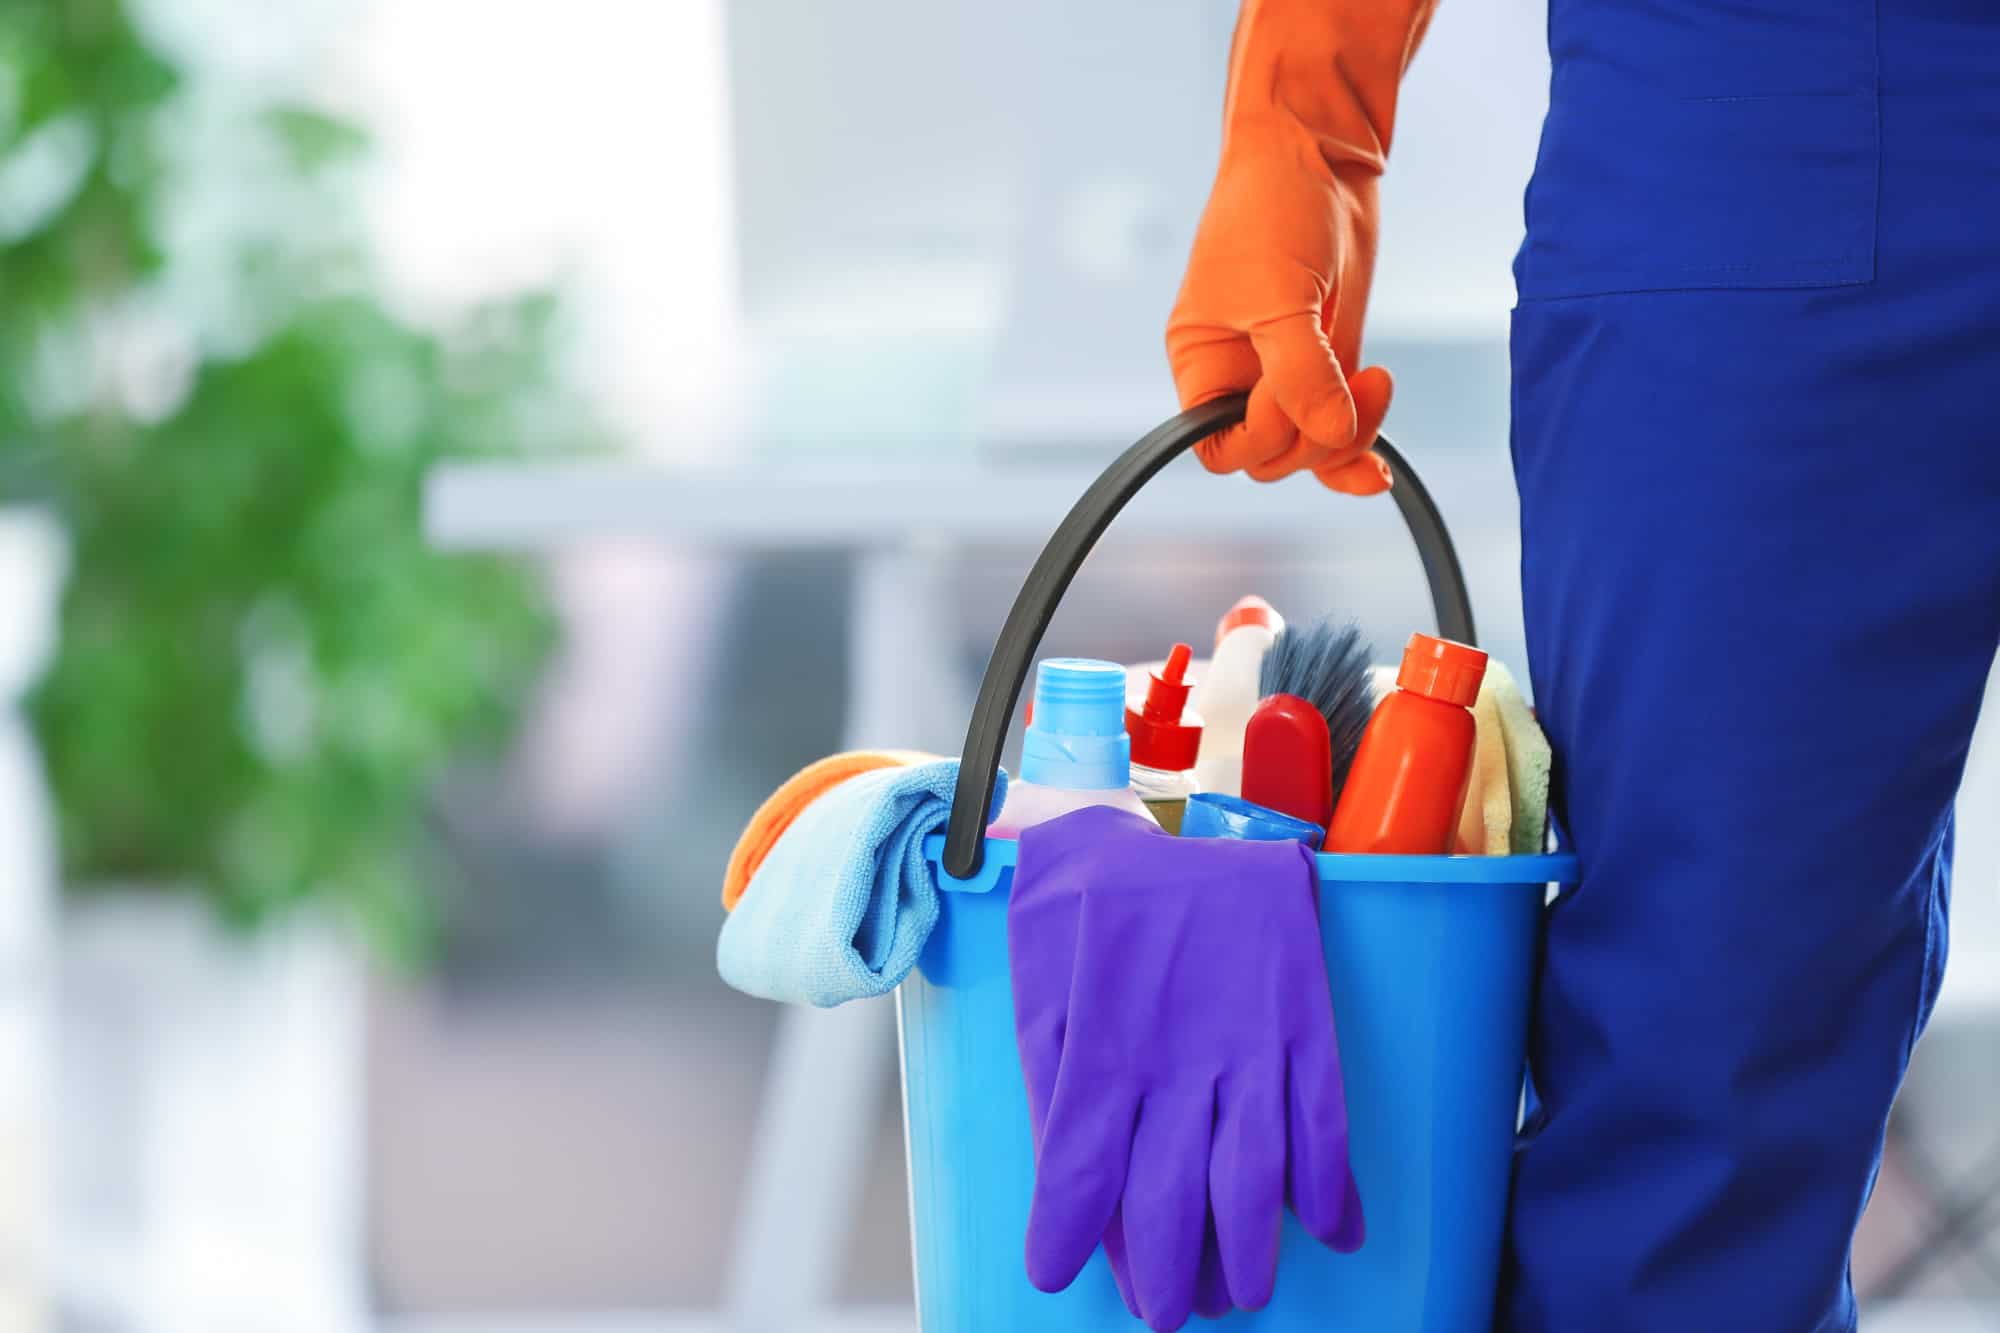 Breathe Maids of Dallas Move Out Cleaning Service